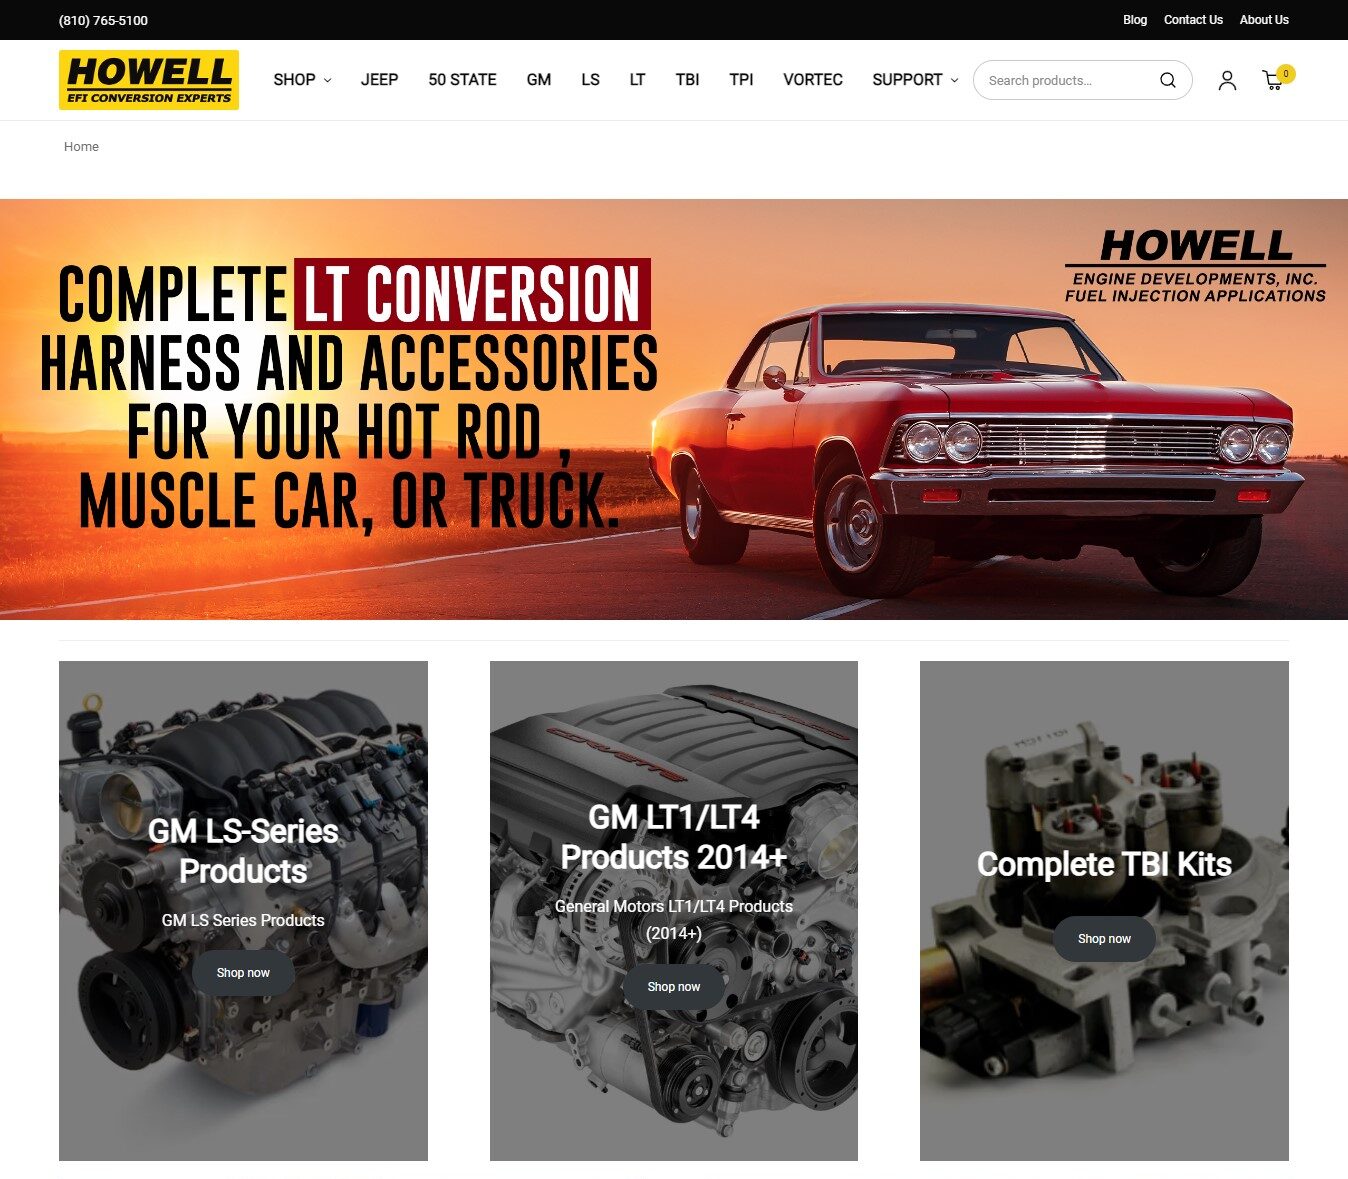 Howell EFI Launches Website & March Madness Promo | THE SHOP